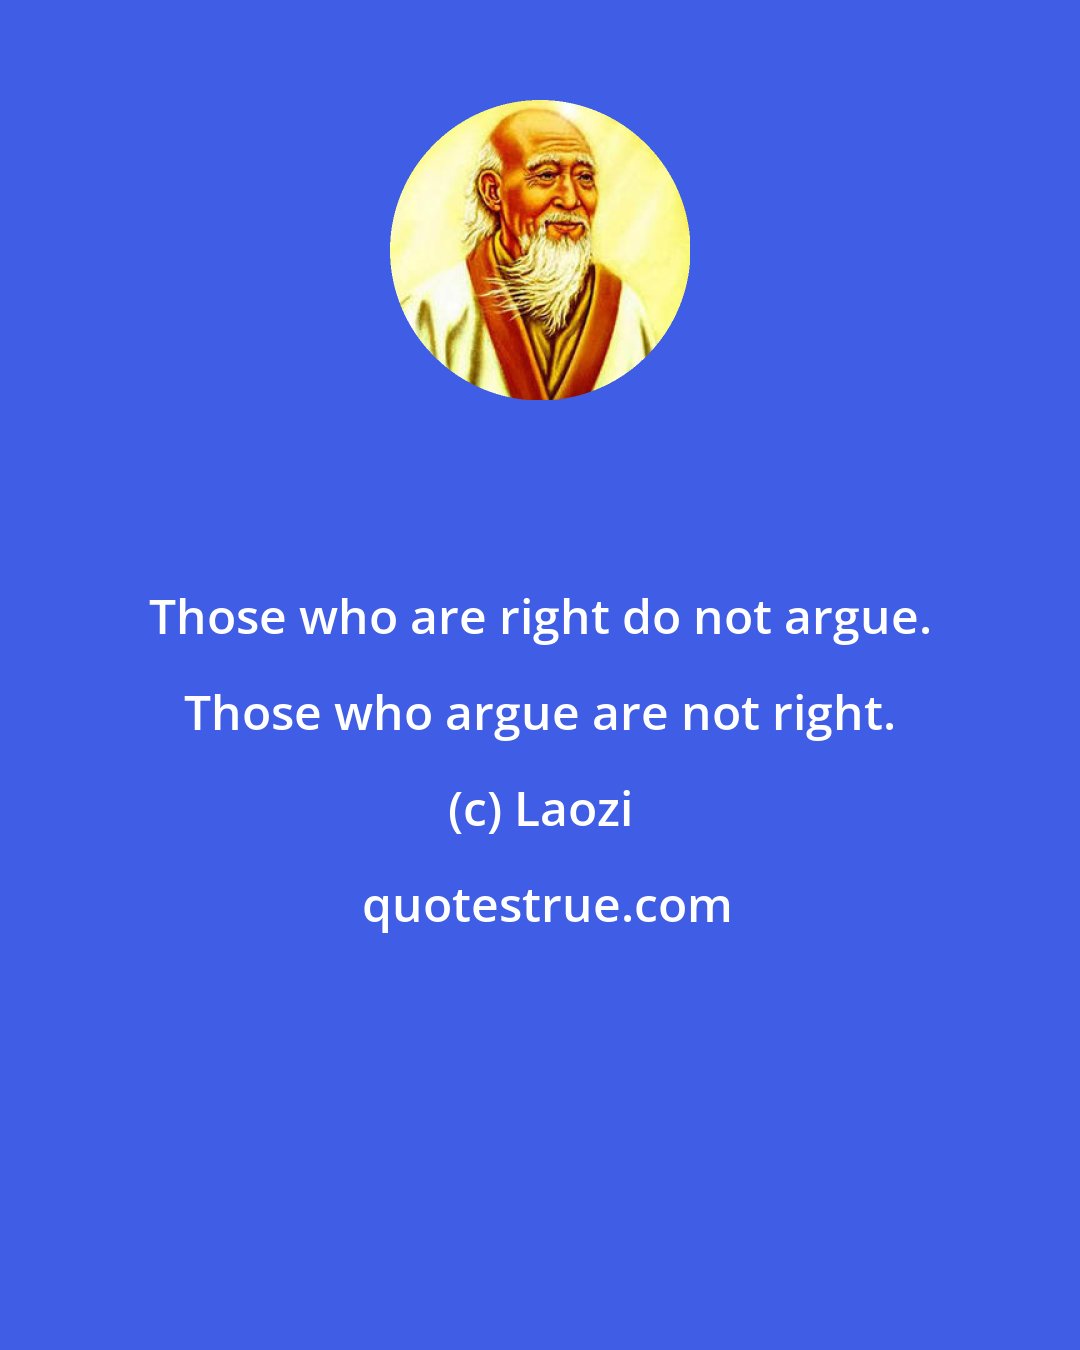 Laozi: Those who are right do not argue. Those who argue are not right.